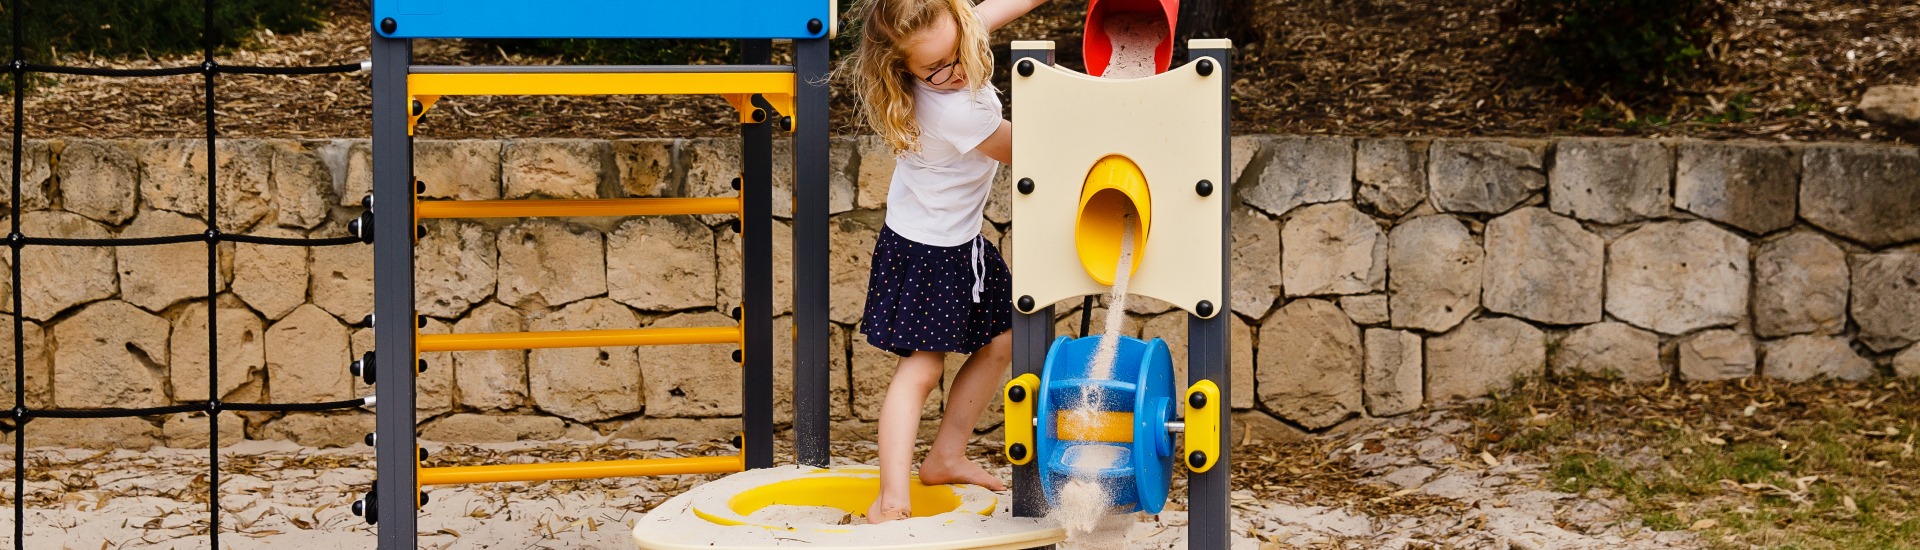 Sand & Water Play System